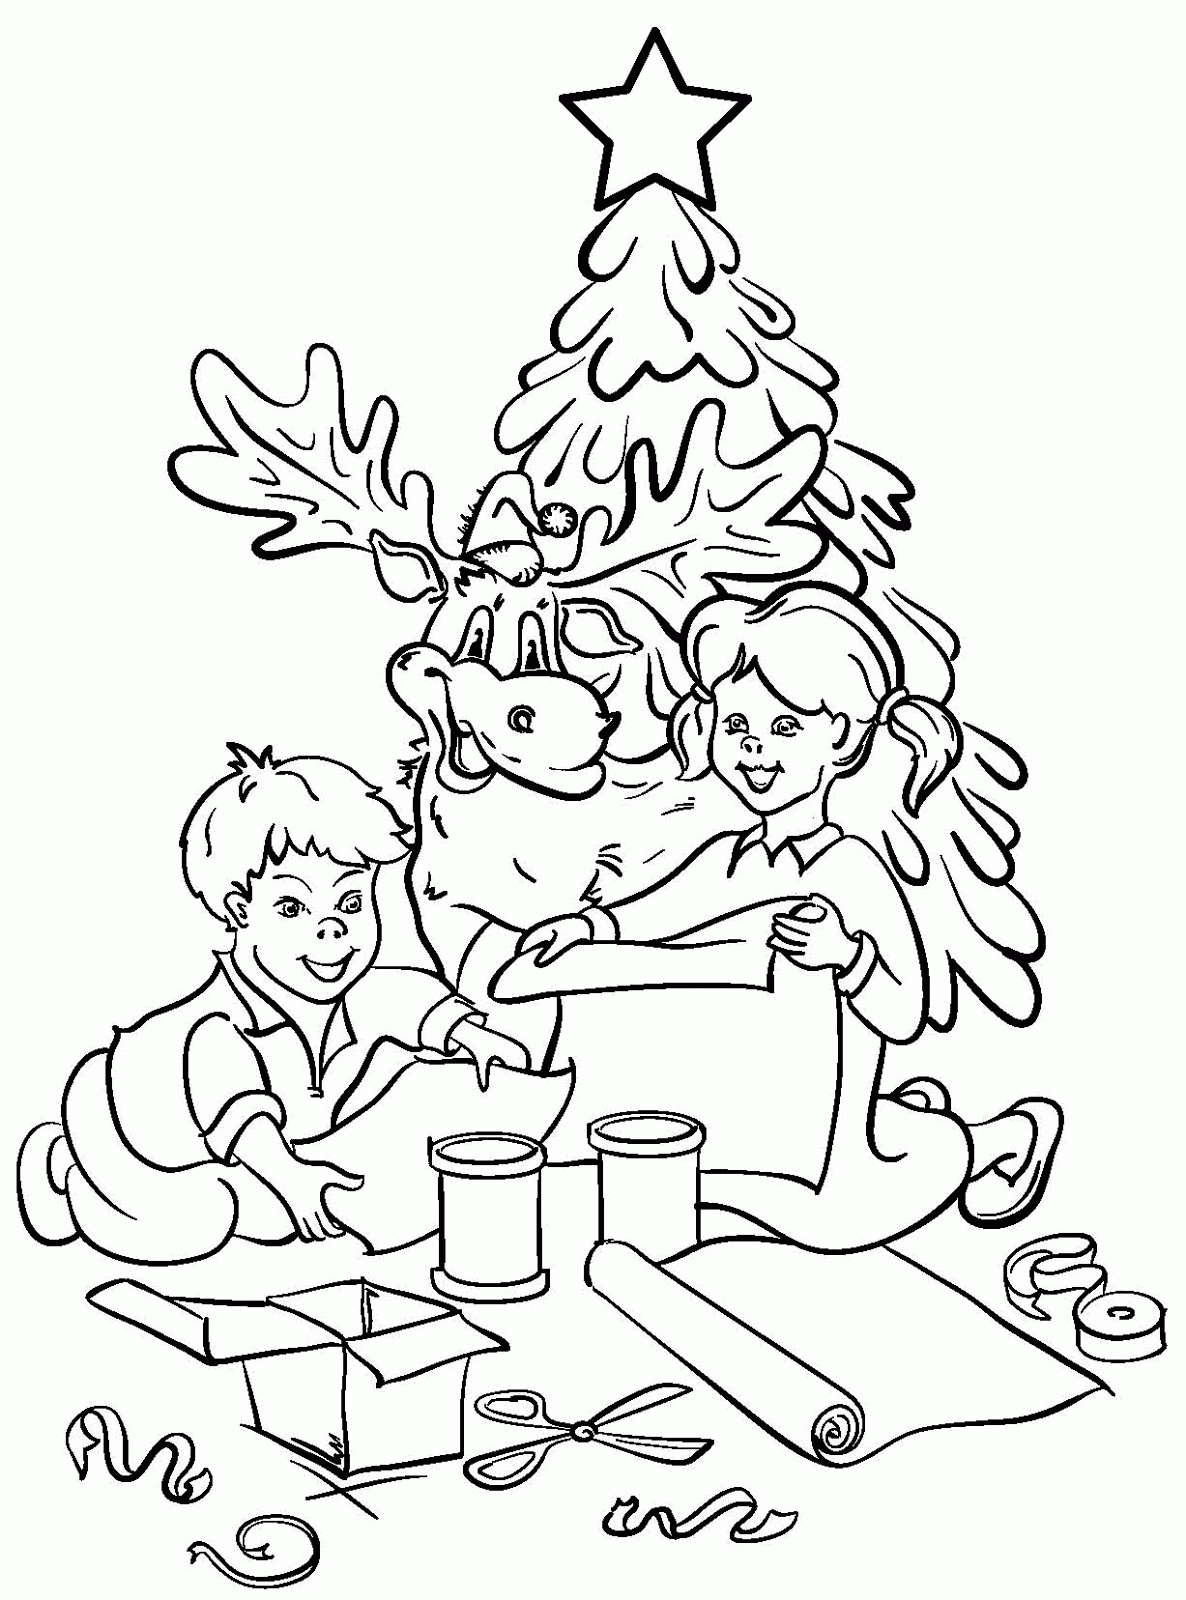 new years coloring page coloring pages new year39s coloring pages free and printable years page new coloring 1 1